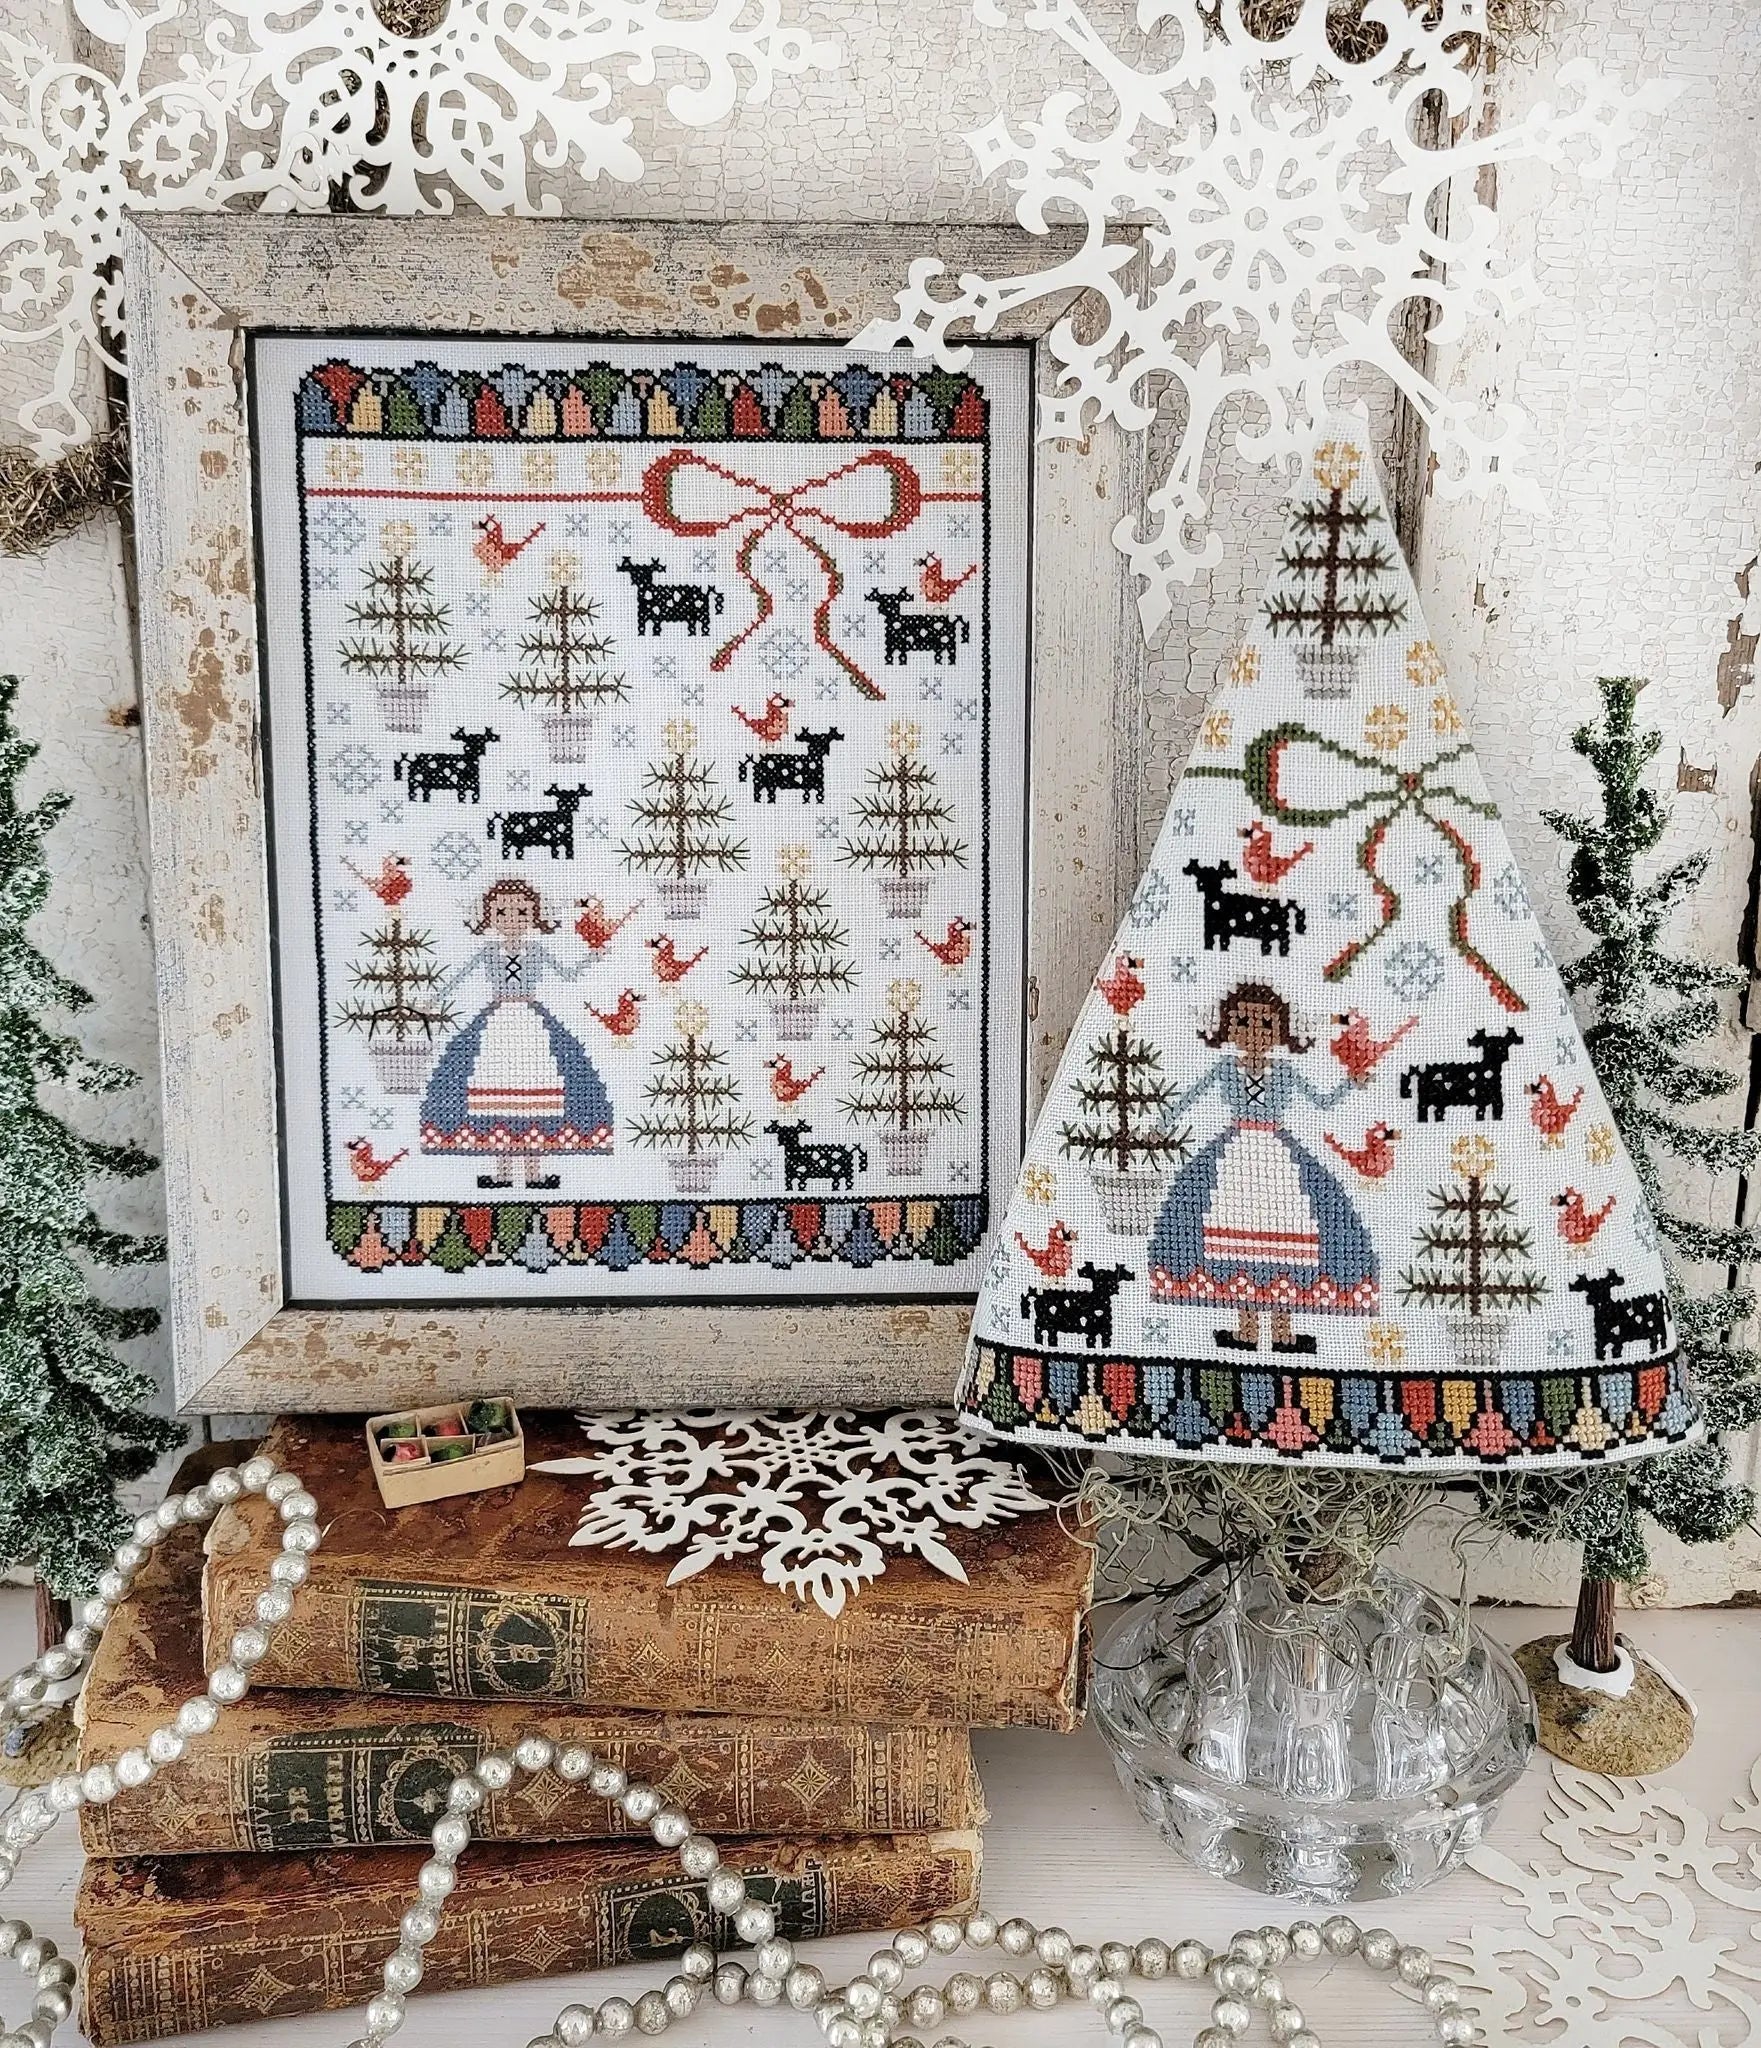 Eighth Day of Christmas Sampler and Tree by Hello from Liz Mathews (pre-order) Hello from Liz Mathews